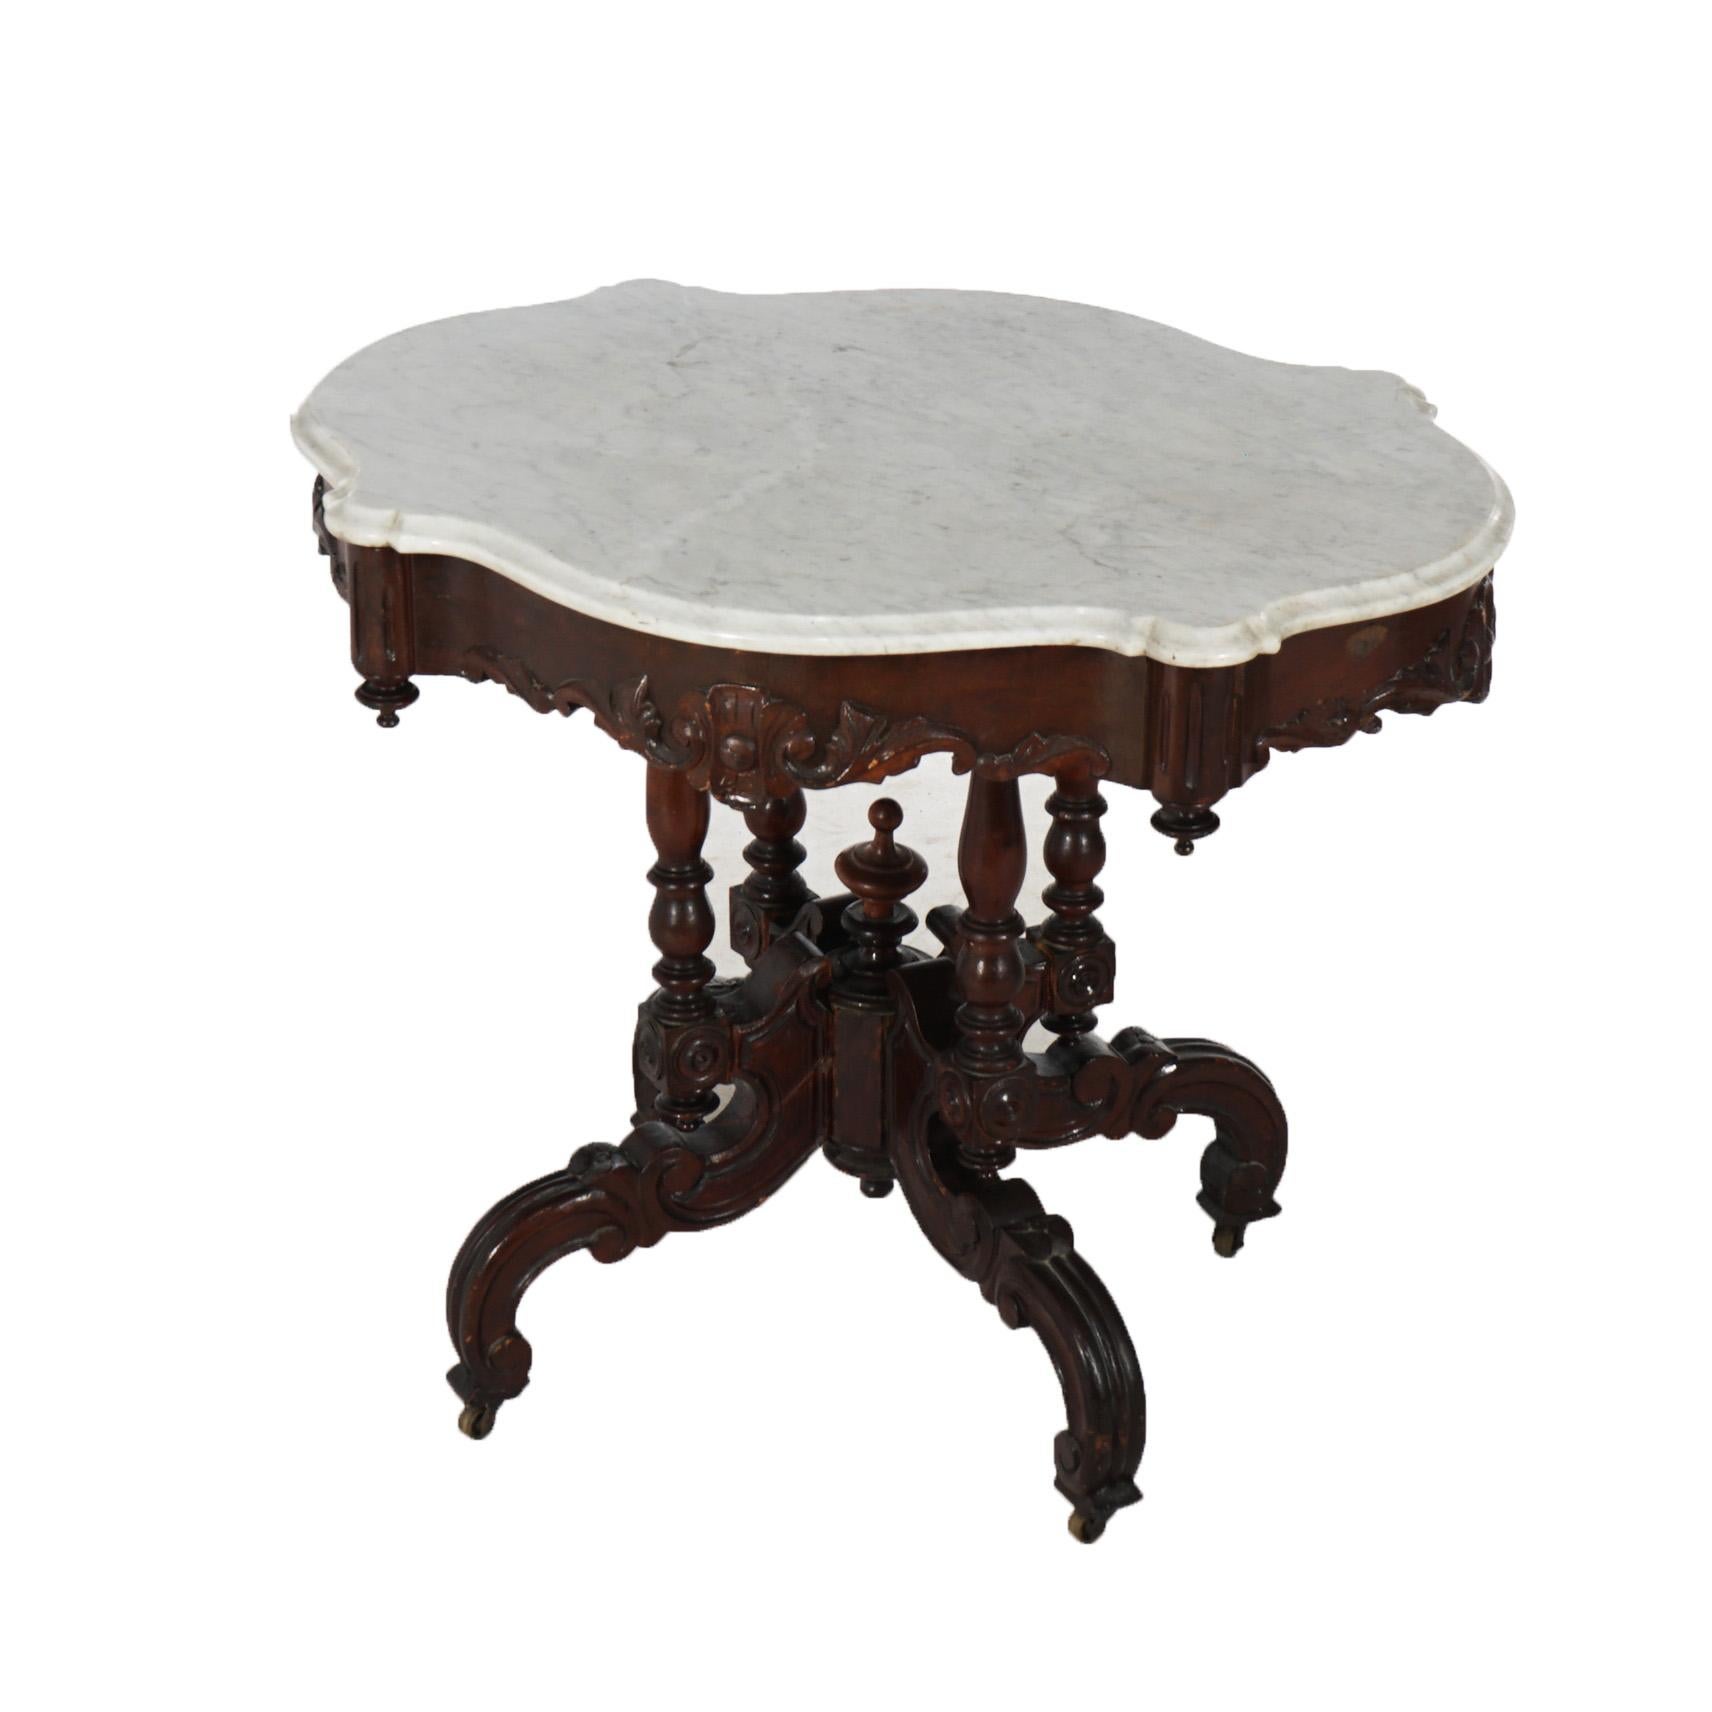 19th Century Antique Renaissance Revival Carved Walnut & Marble Turtle Top Table C1890 For Sale